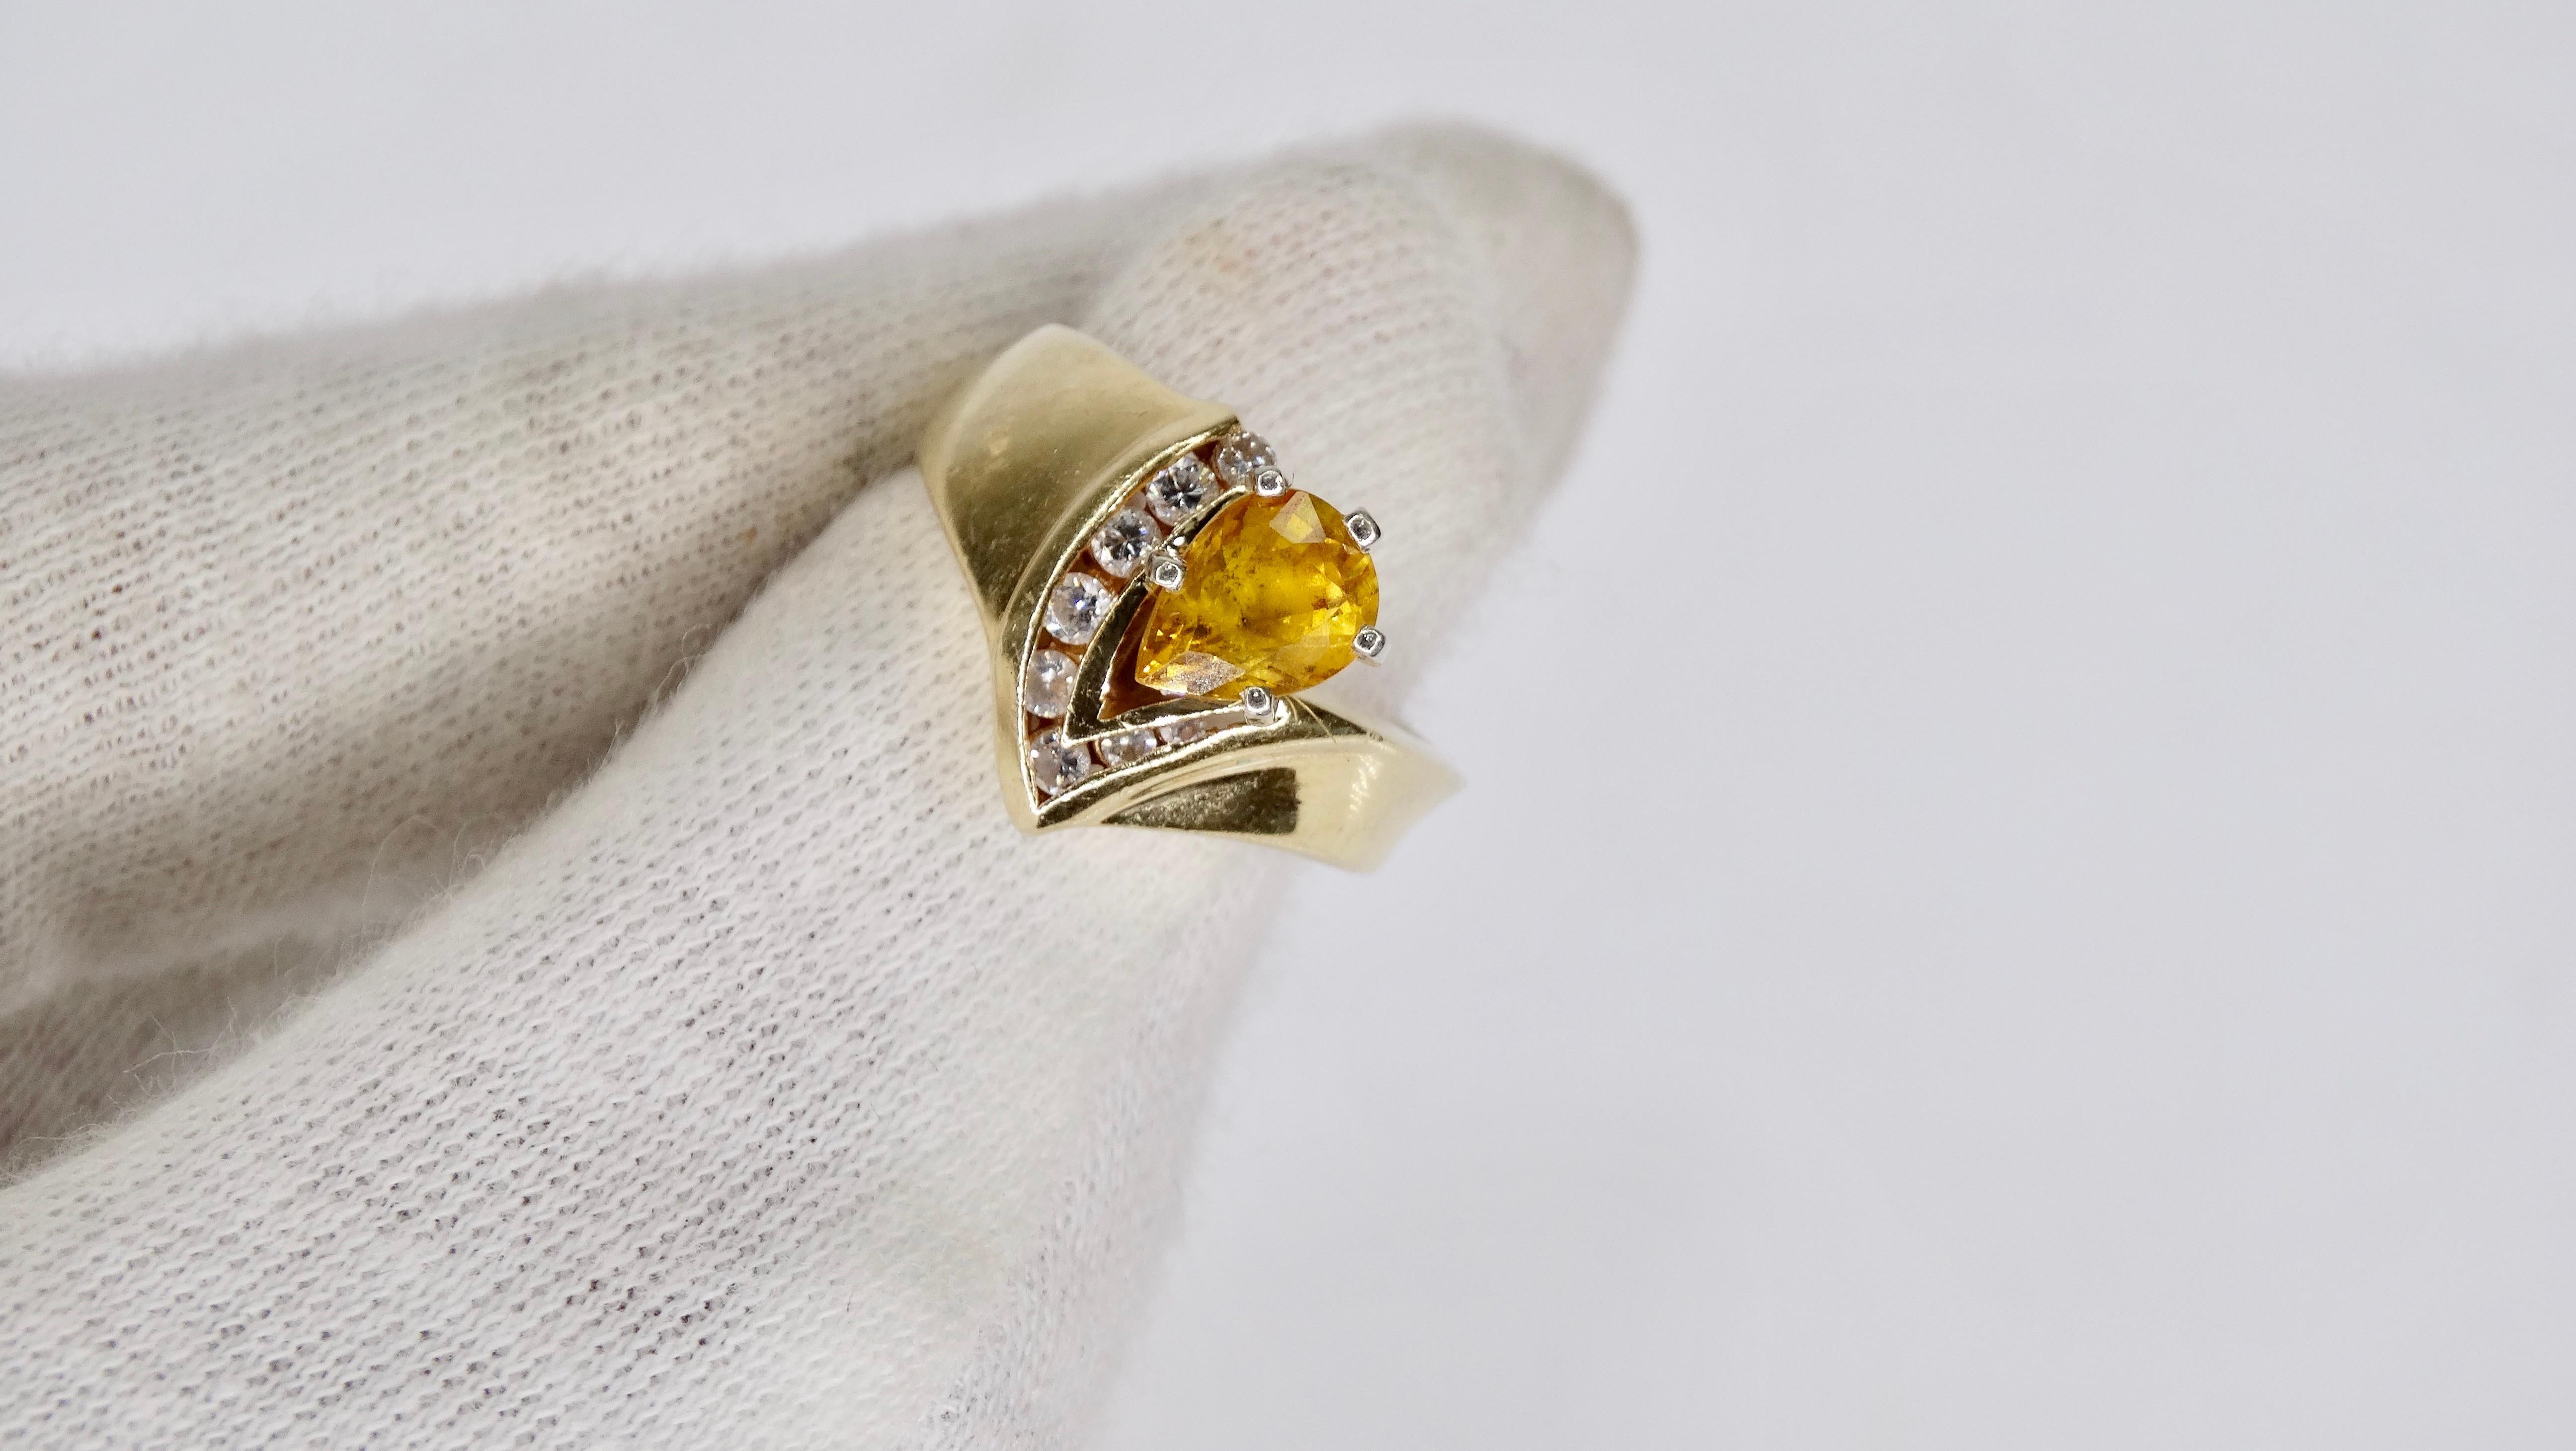 Beautiful mid 20th century 14k Gold ring with a pear cut Citrine stone in a prong setting surrounded by 7 Diamonds in a v-shaped channel setting. Ring is a size 4.5 and weighs 5.6g total. Perfect to wear for a night out with your favorite vintage